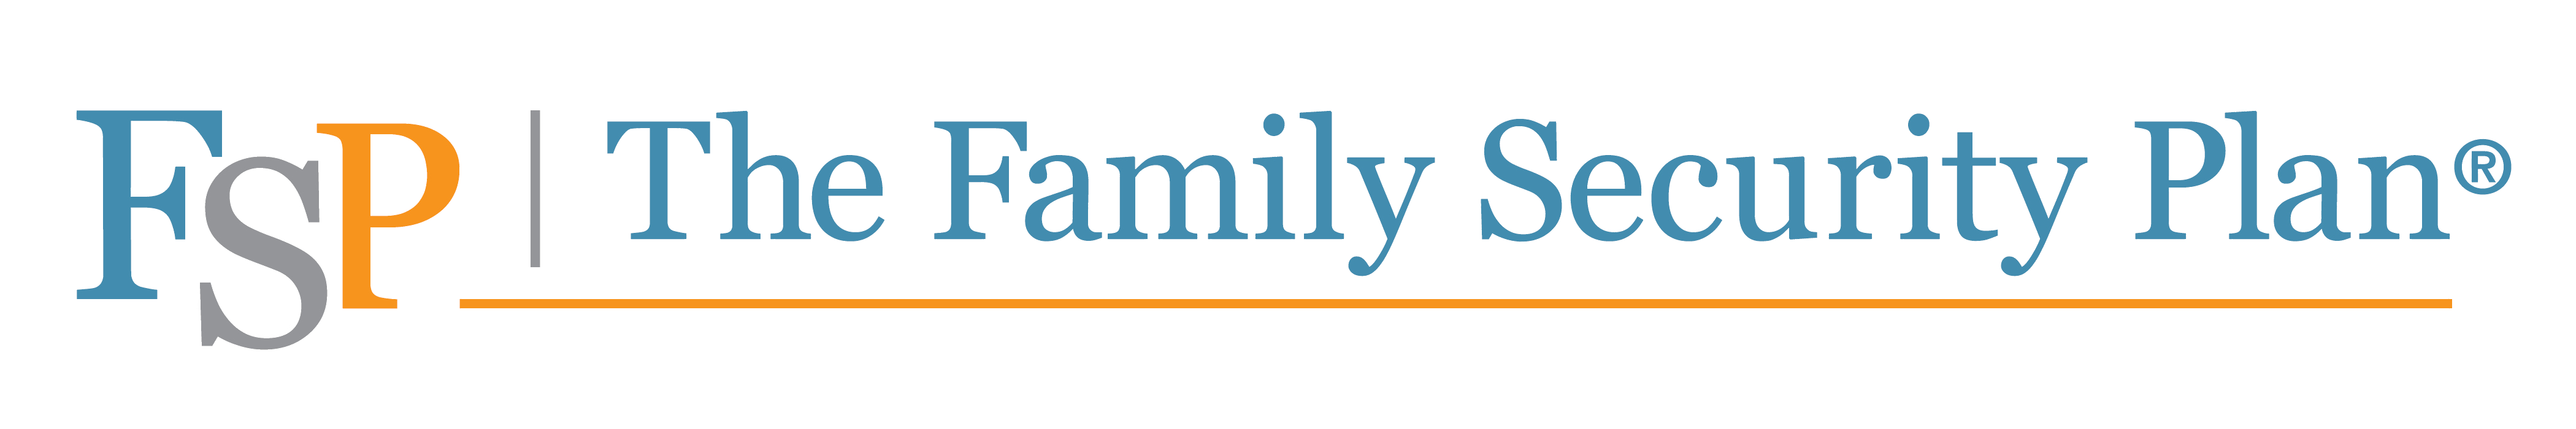 The Family Security Plan